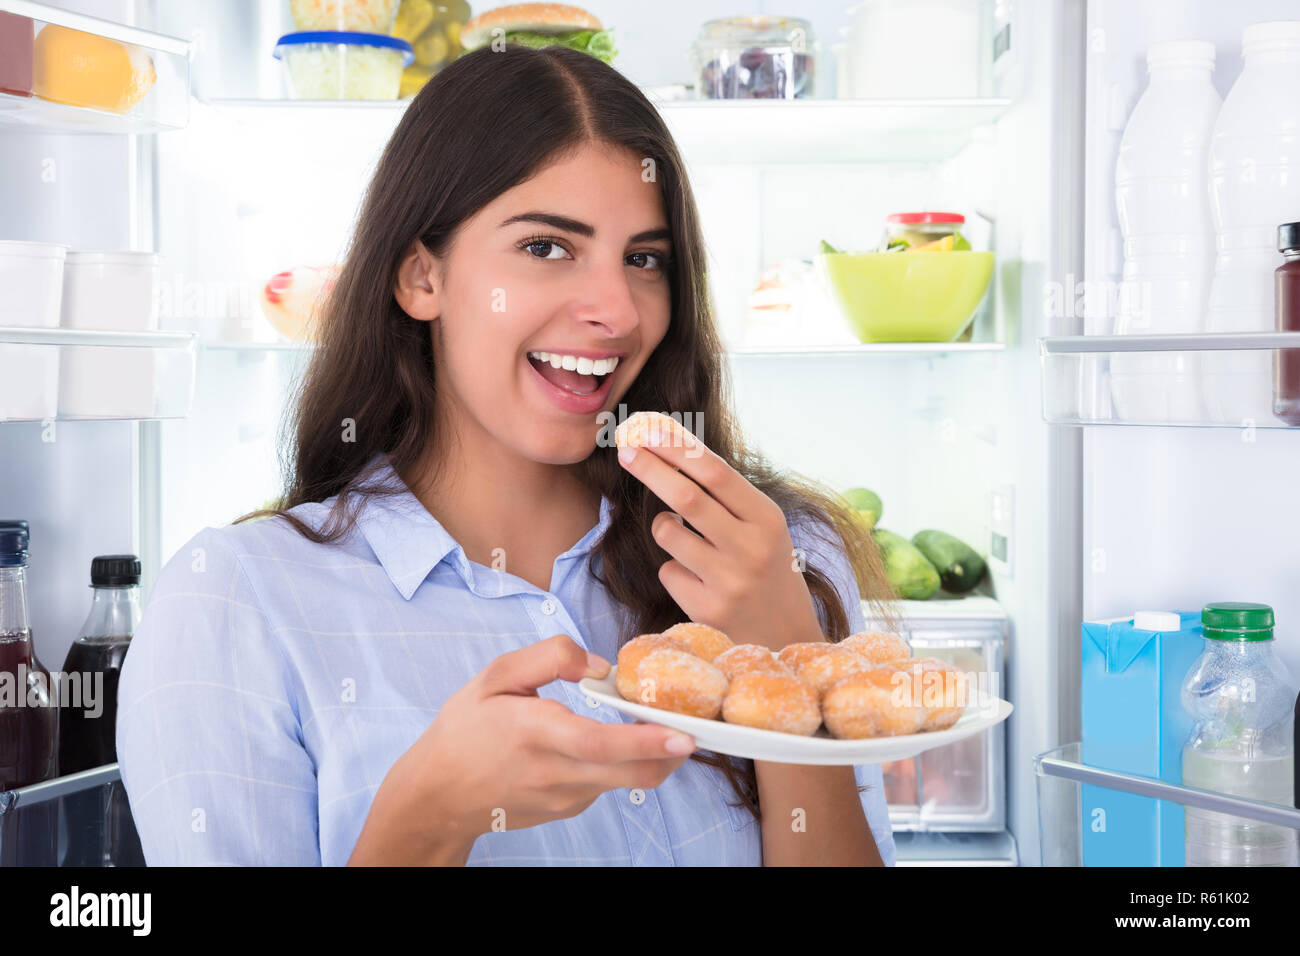 Smiling Woman Eating Cookies In Plate Stock Photo